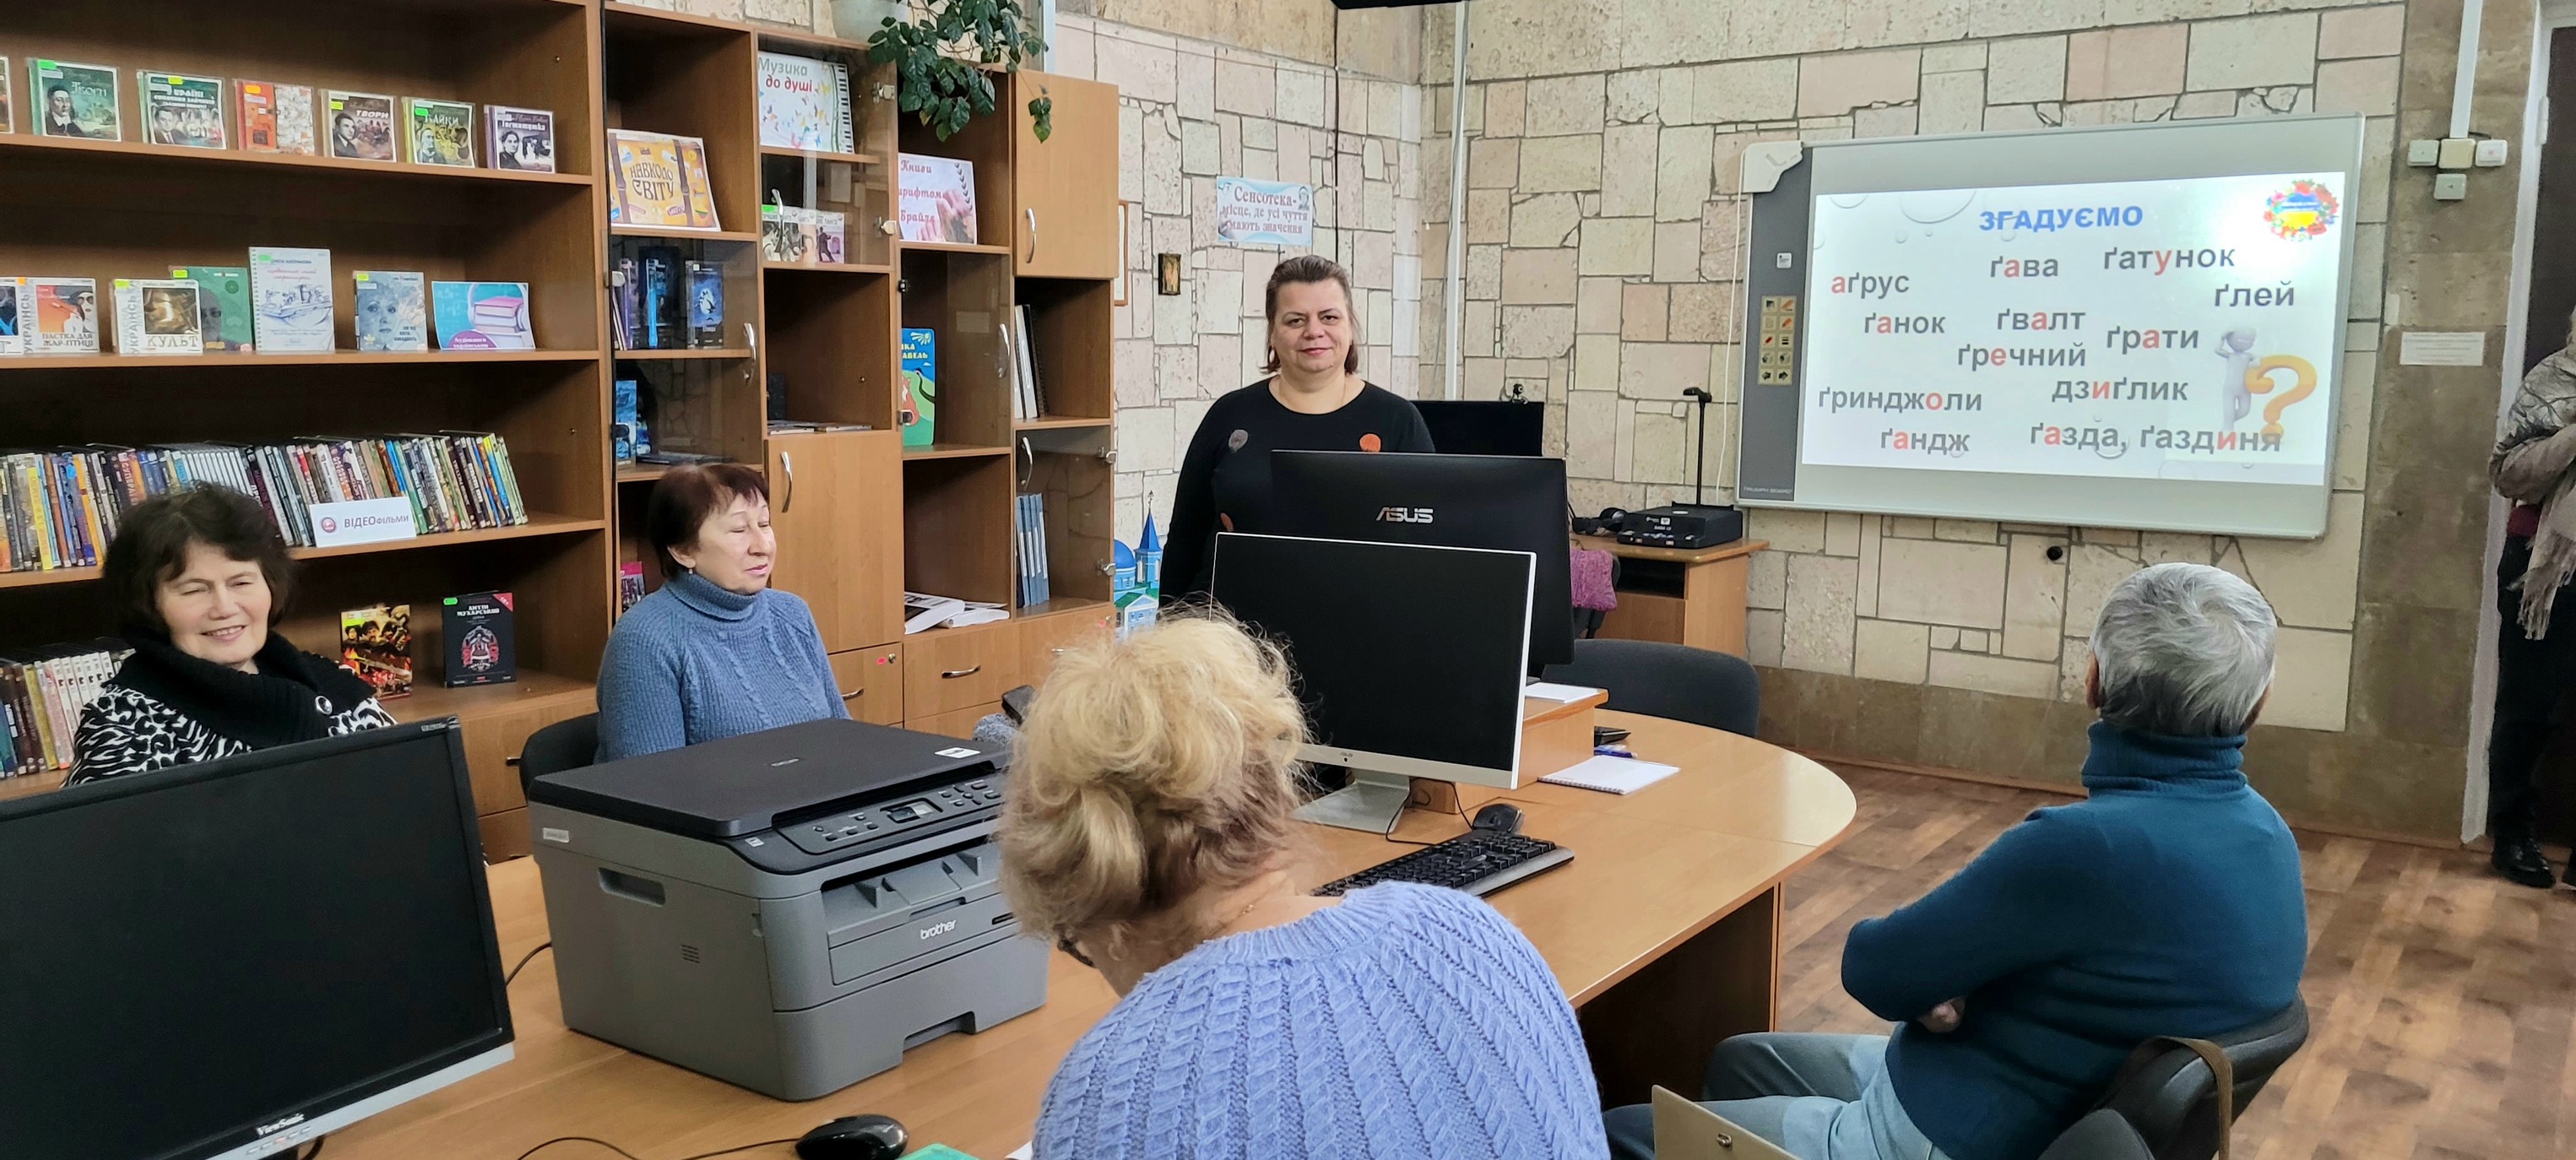 Larysa Sychenko, the moderator of the Ukrainian language conversation club, cooperates on a volunteer basis with the CCL named after M.L. Kropyvnytskyi